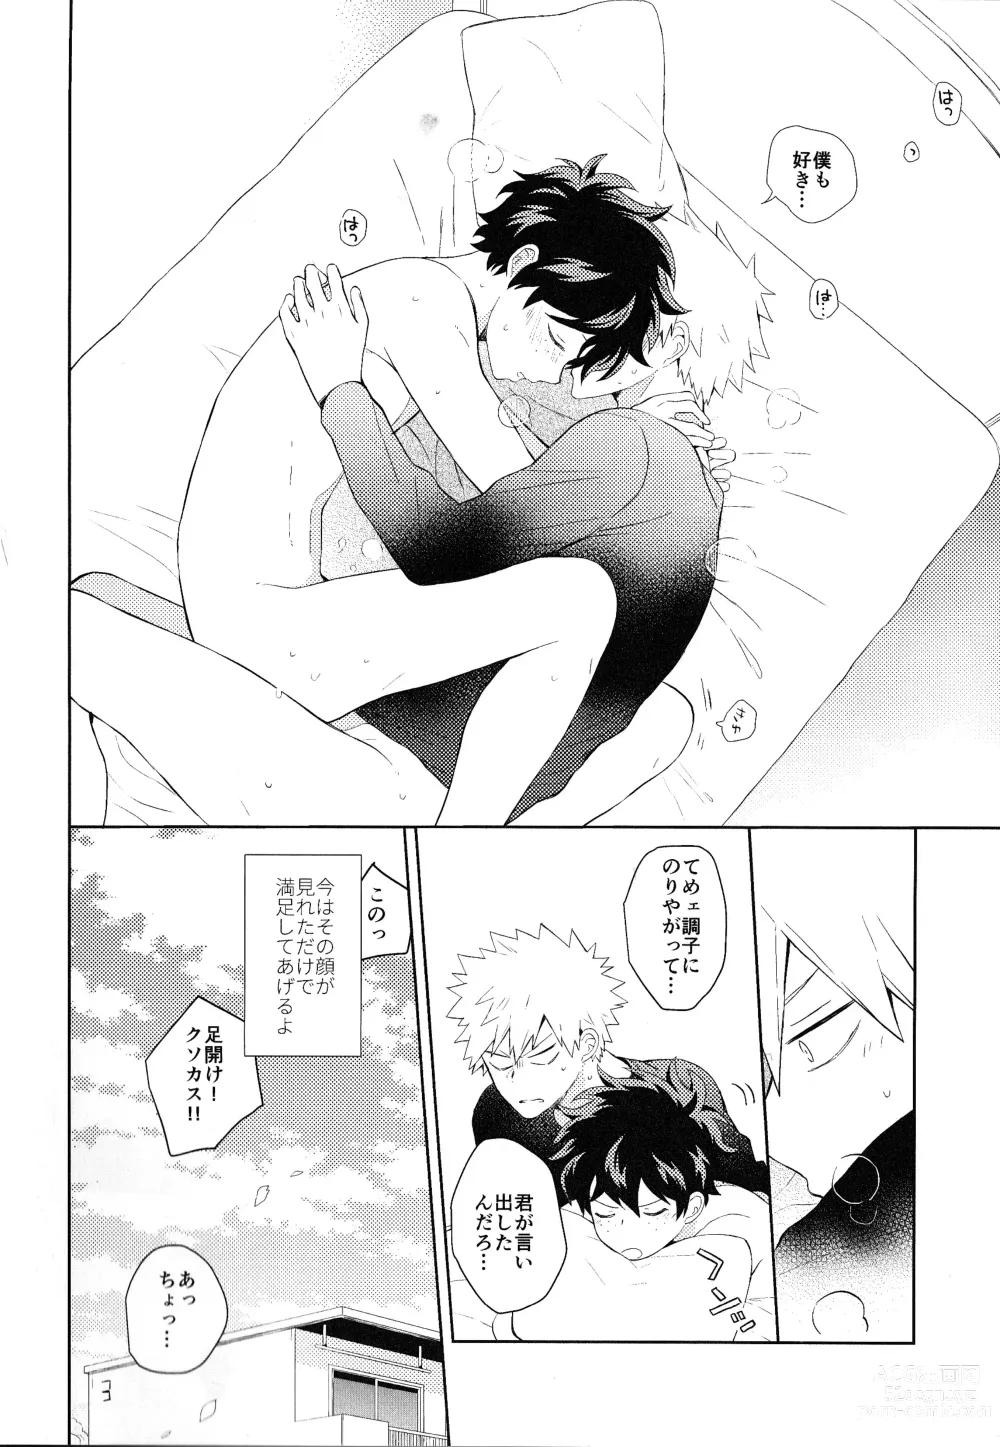 Page 23 of doujinshi The Four Seasons ~KD R18 Anthology~